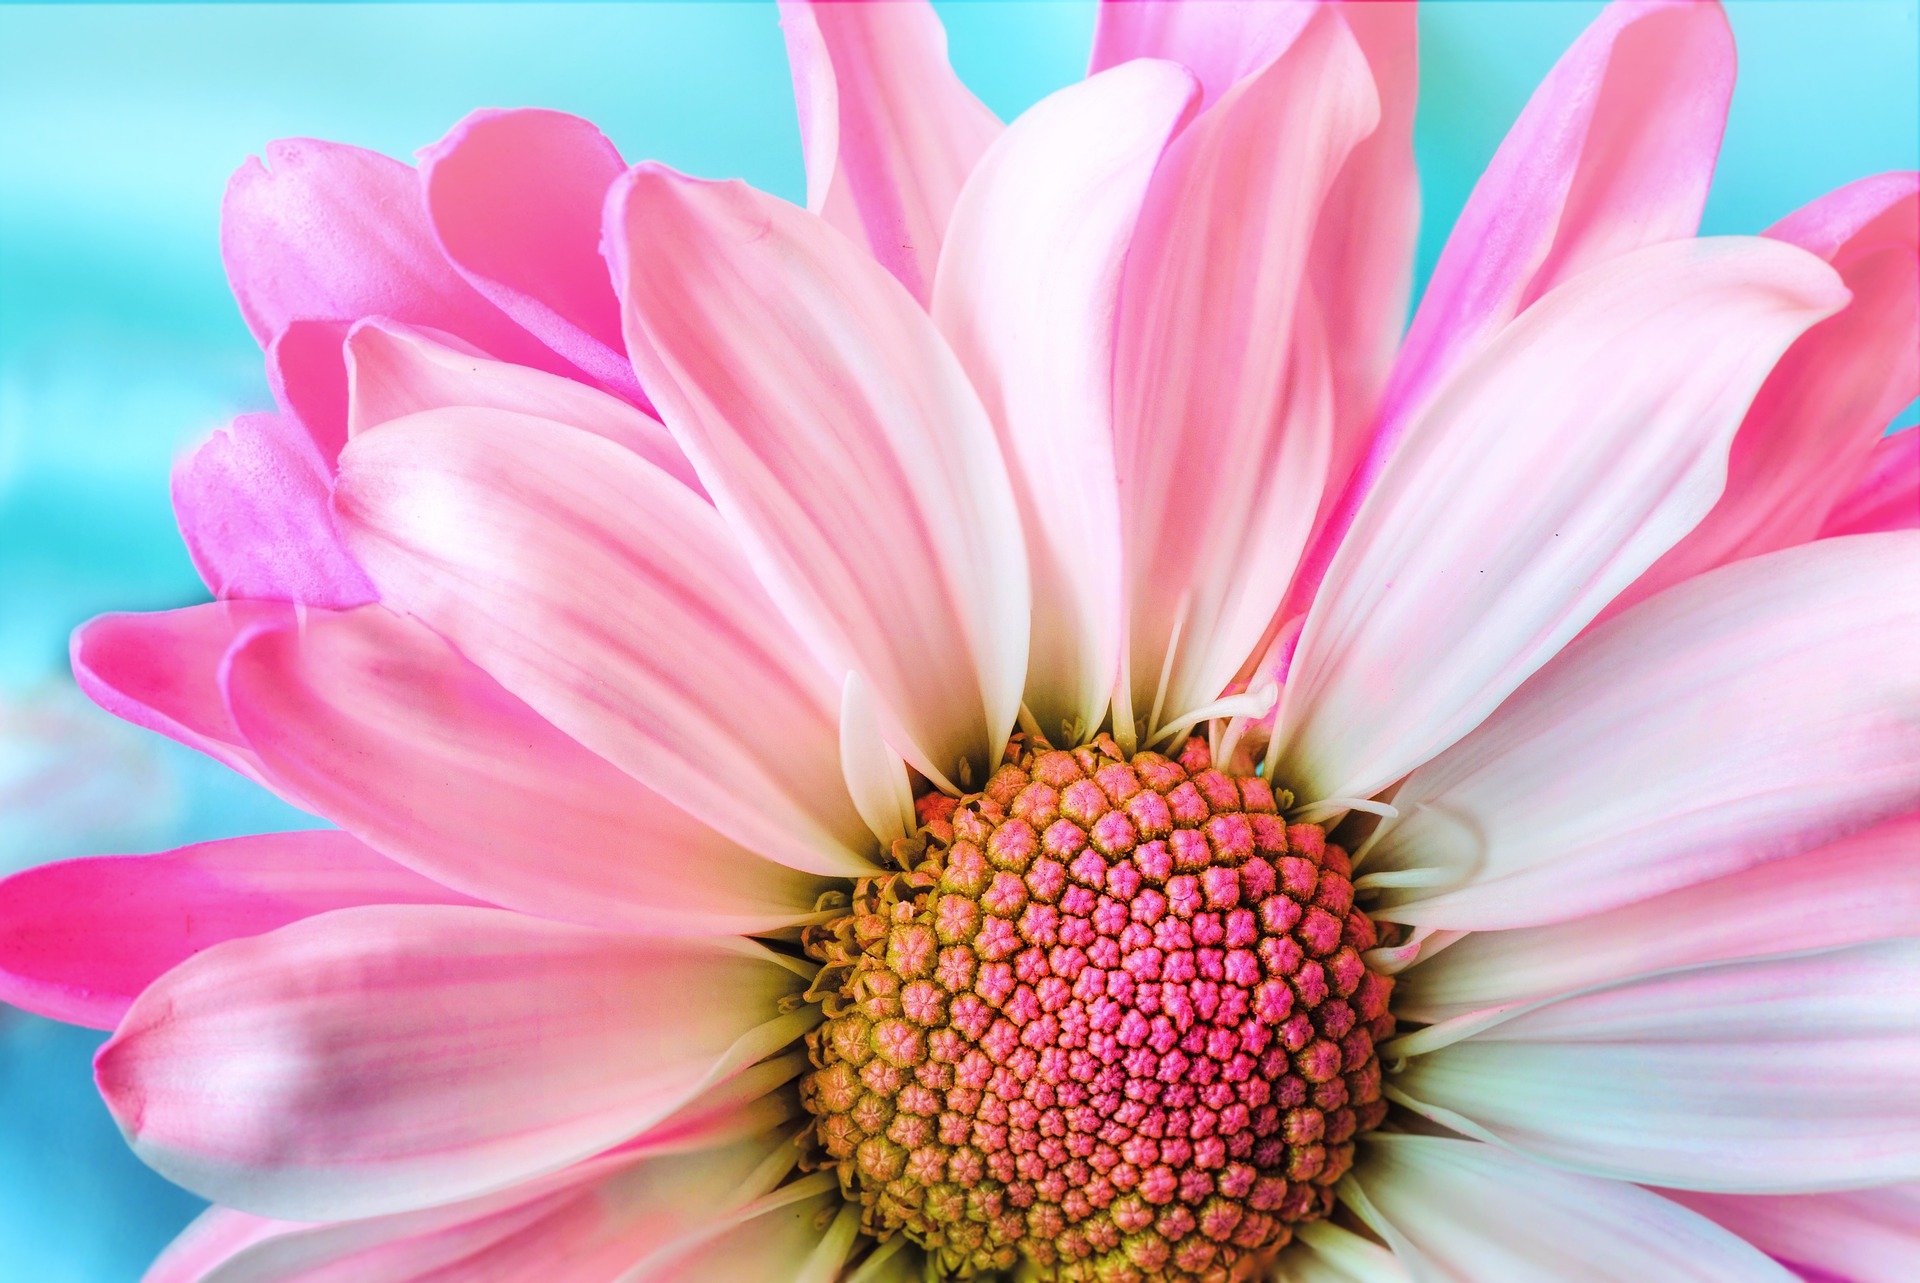 Close-up image of a pink flower on a blue background 